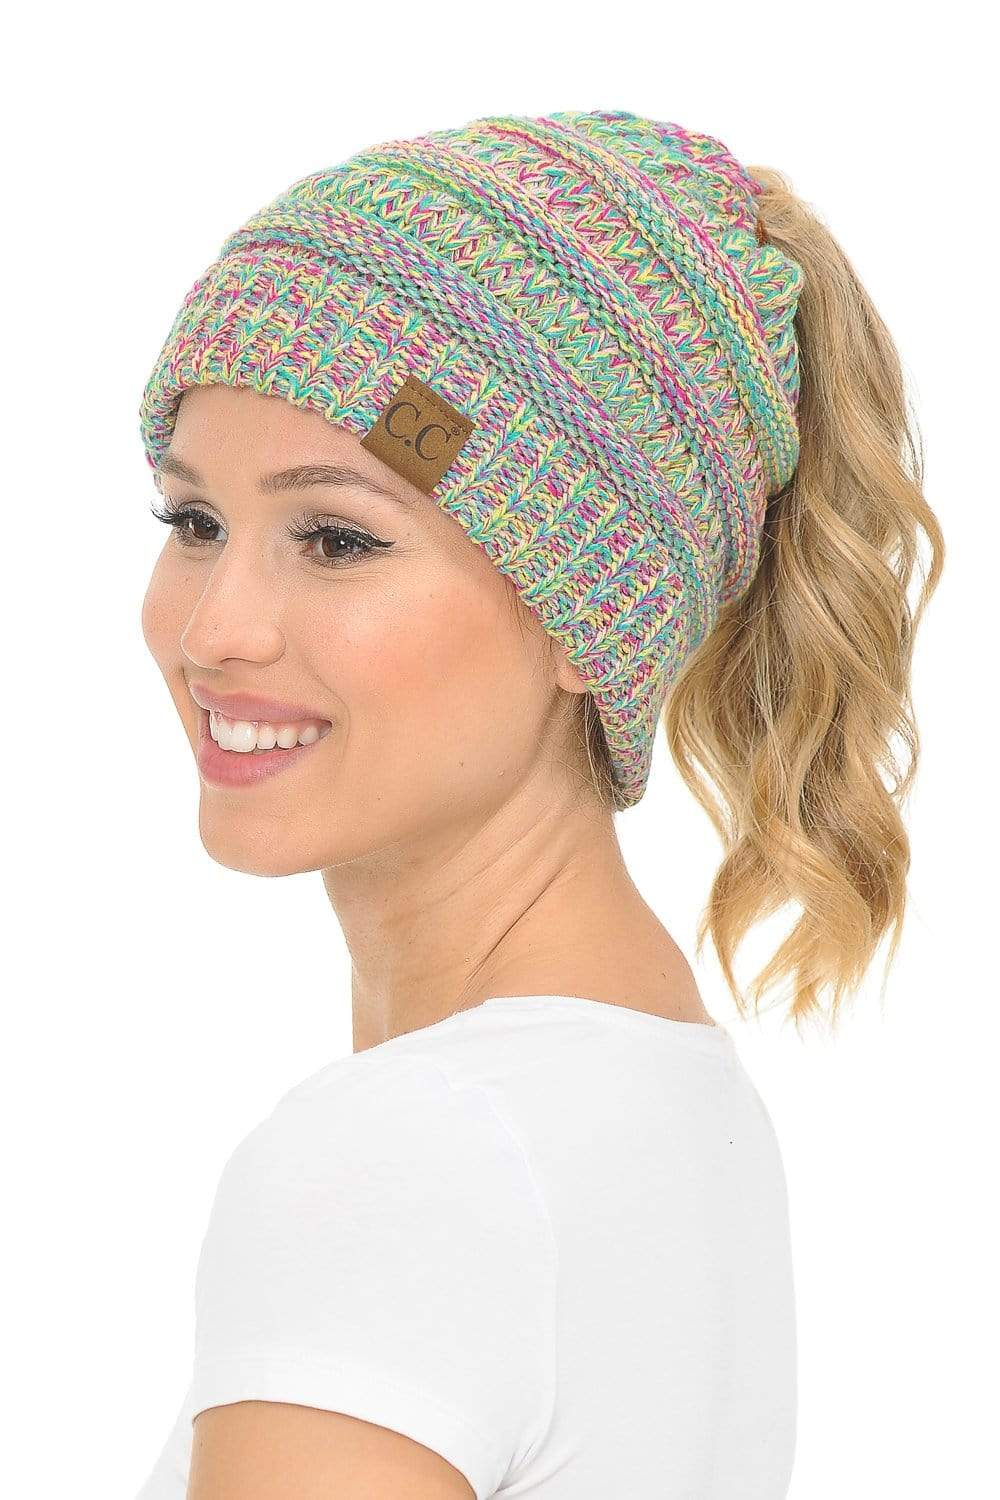 C.C Apparel Bright Mix (#11) C.C MB816 - Soft Stretch Cable Knit Warm Ponytail Hat 4 Toned Mixed Multi Color Beanie